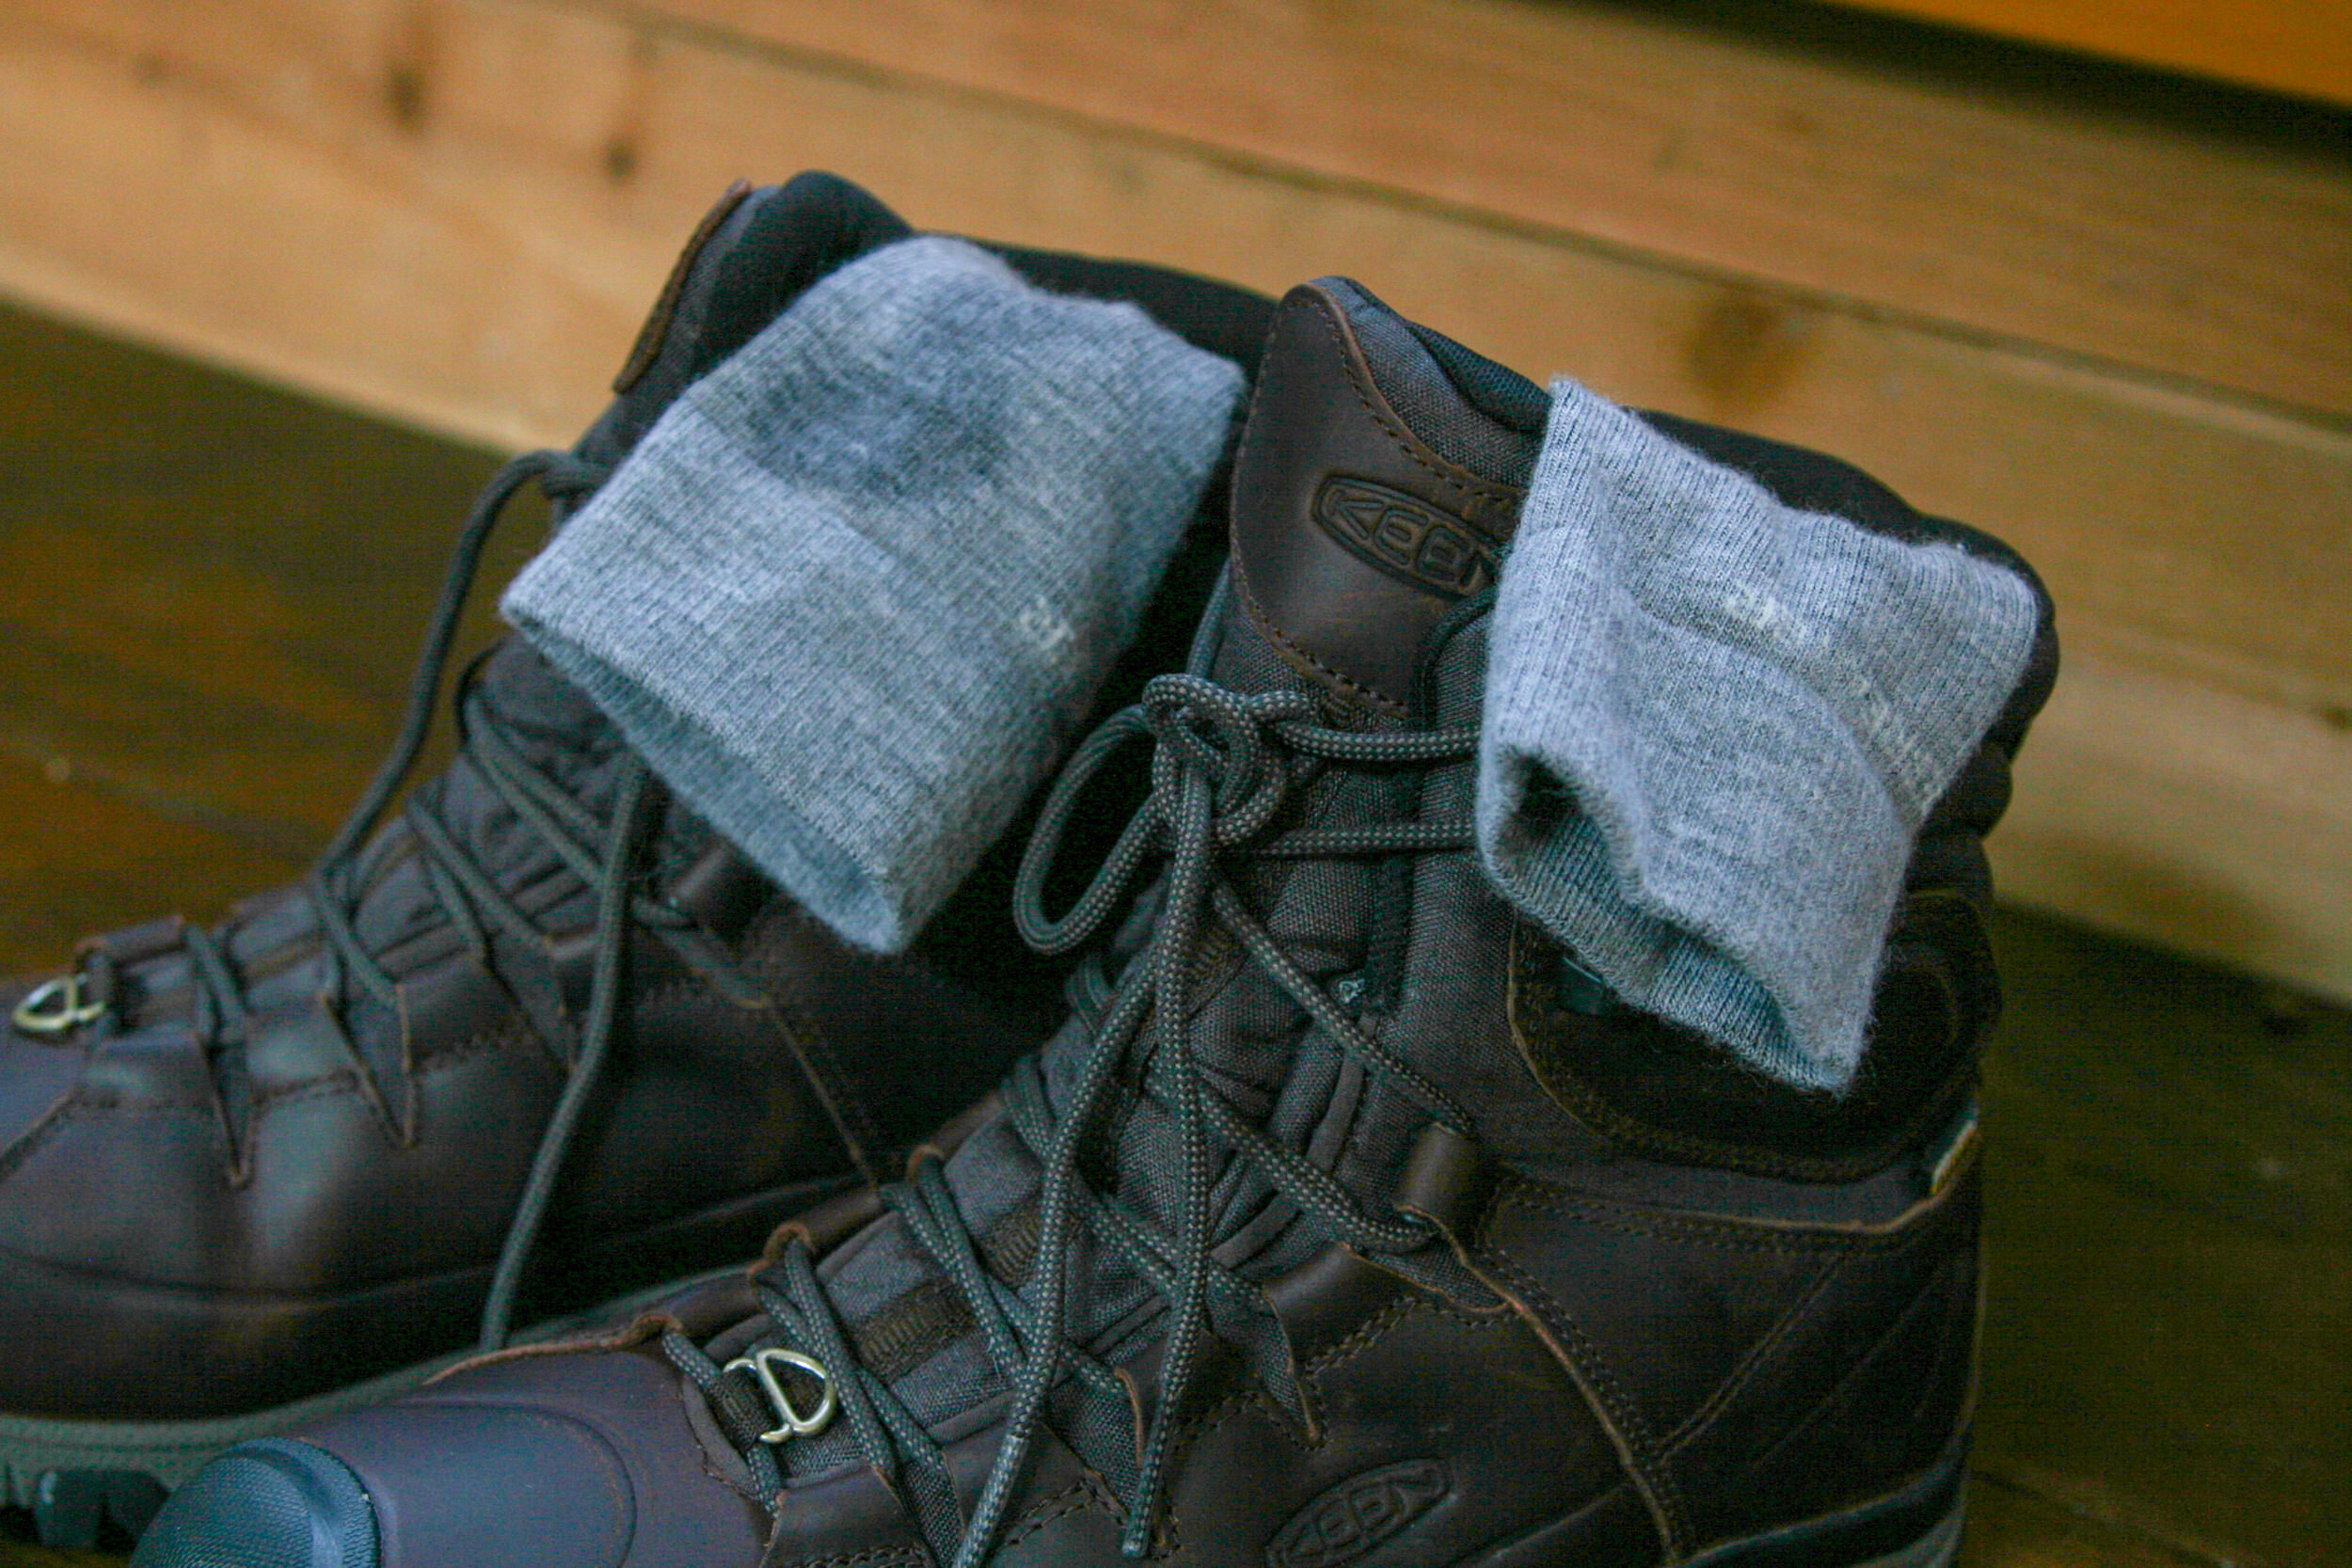 Light or Medium-Cushioned Merino wool Socks complete the Keen Targhee High Lace Boots